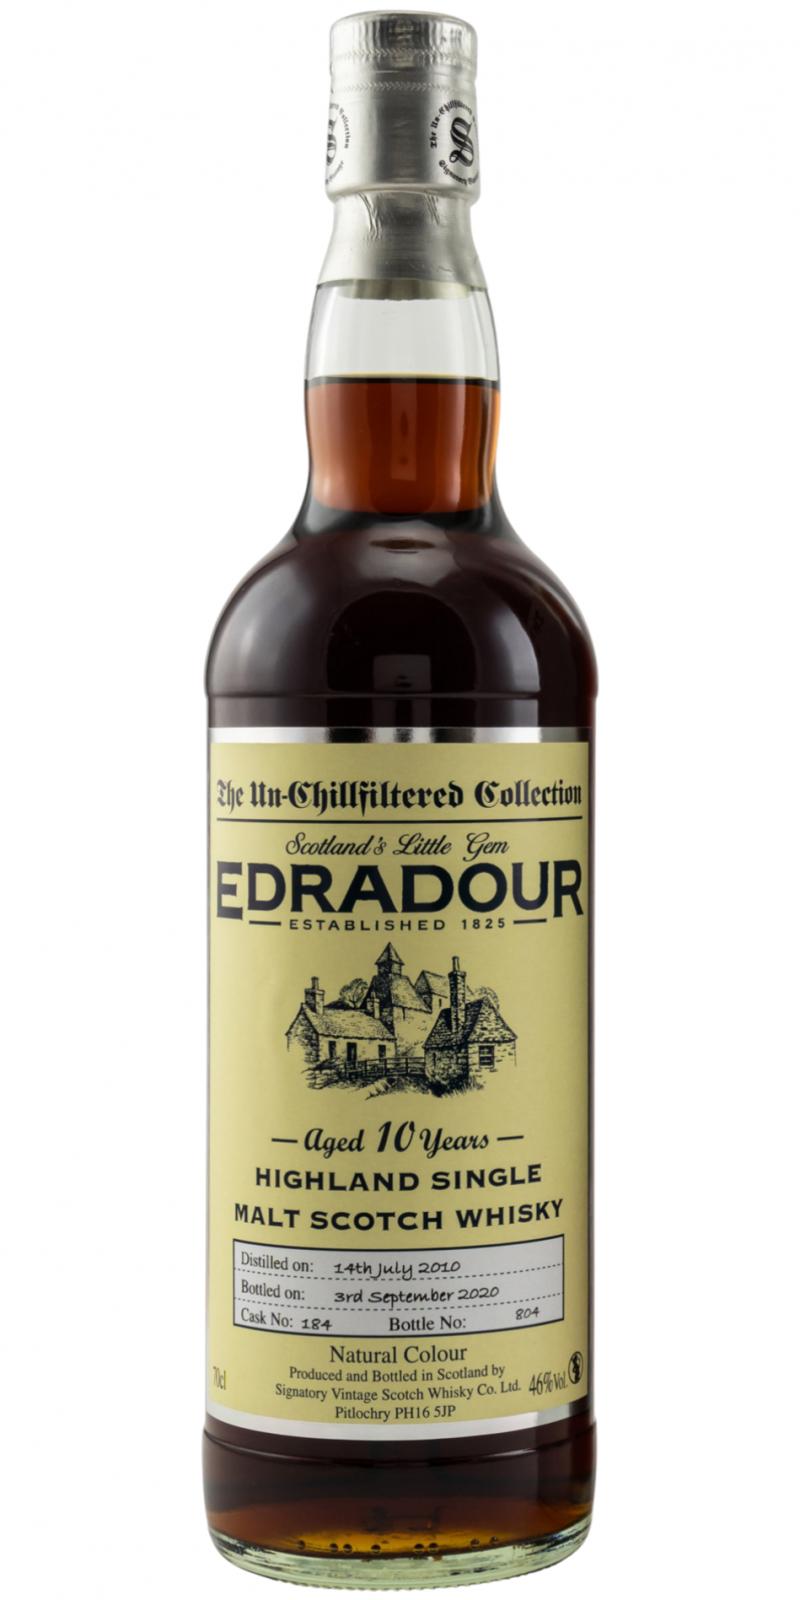 Edradour 2010 SV The Un-Chillfiltered Collection Sherry Cask #184 46% 700ml